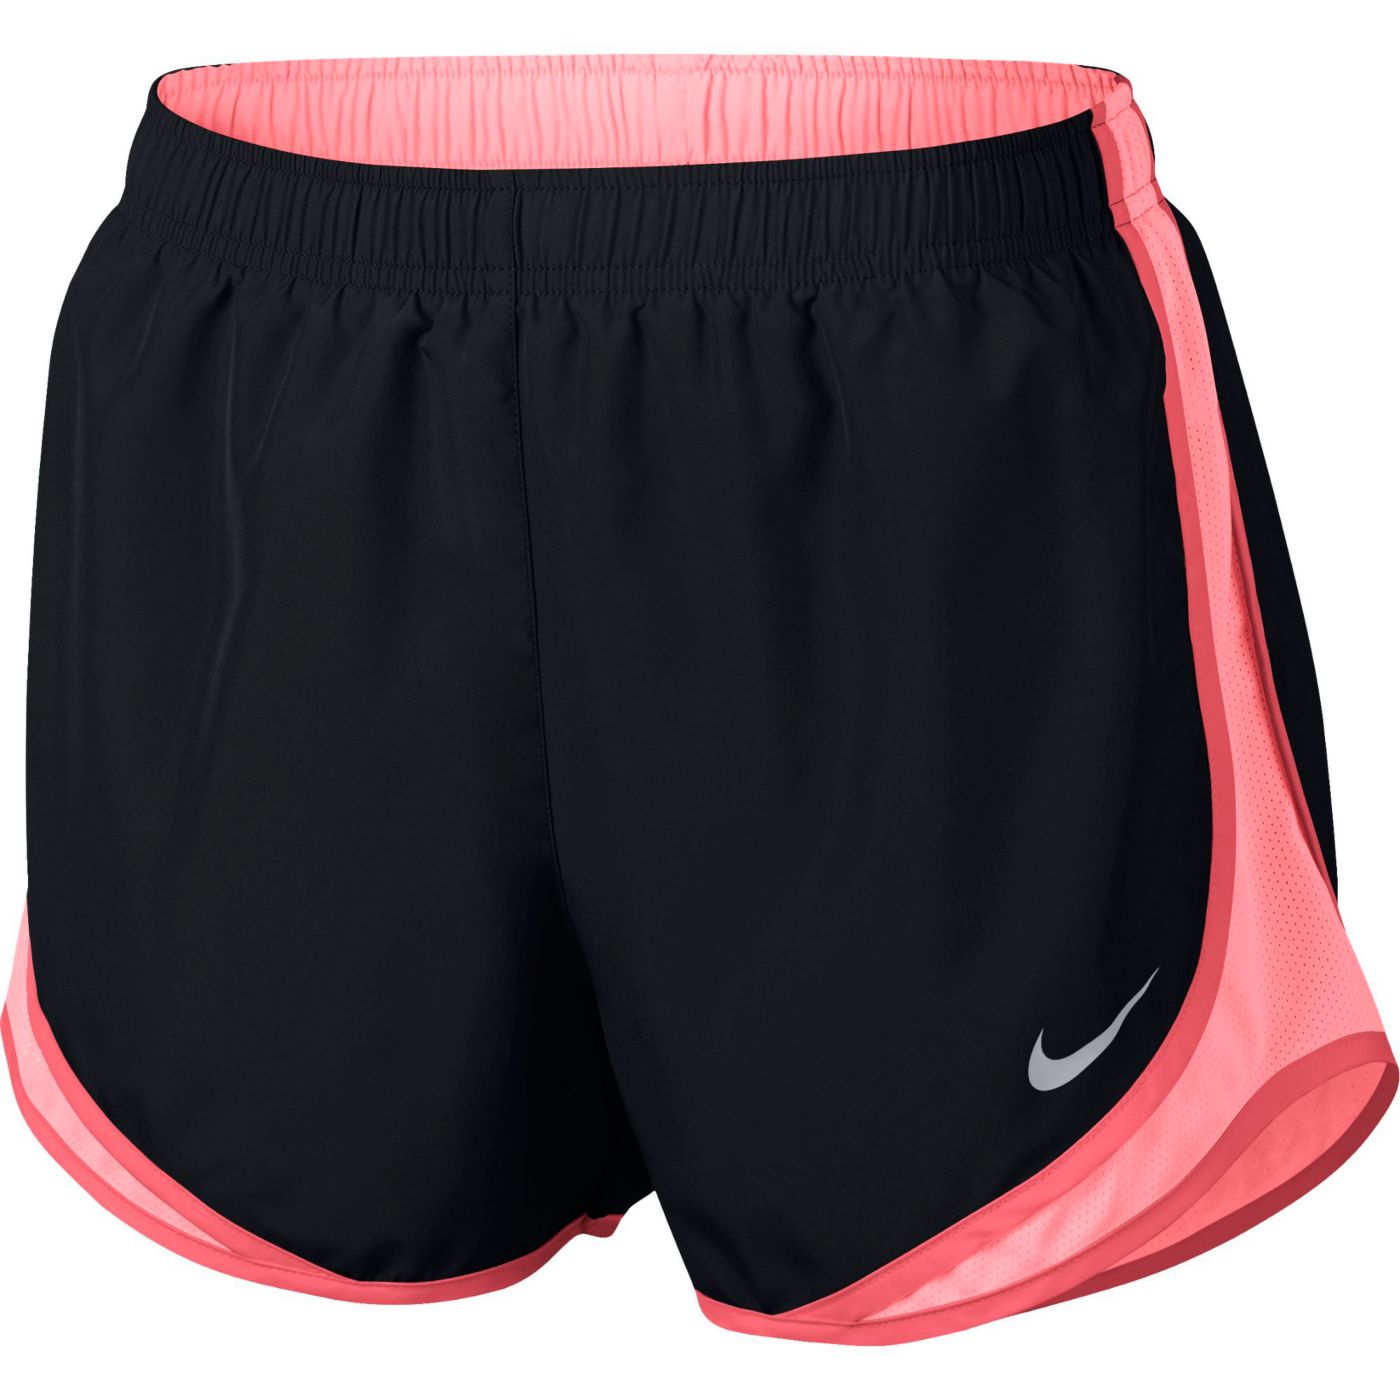 Download Nike Women's Dry 3'' Tempo Running Shorts | DICK'S ...